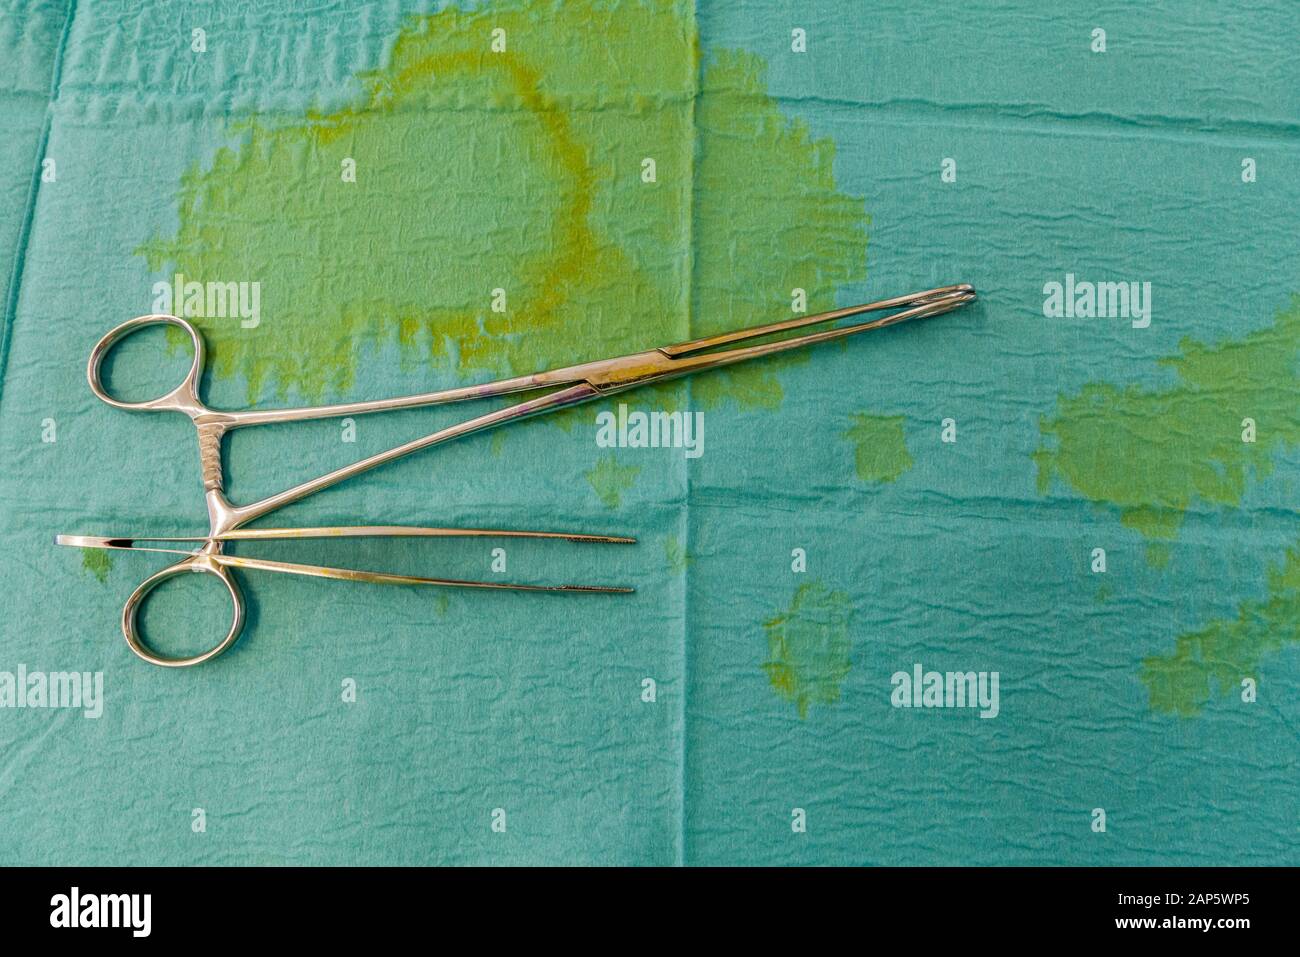 Surgical hemostats and tweezers. Heart valve replacement surgery, operating room, Reykjavik, Iceland Stock Photo